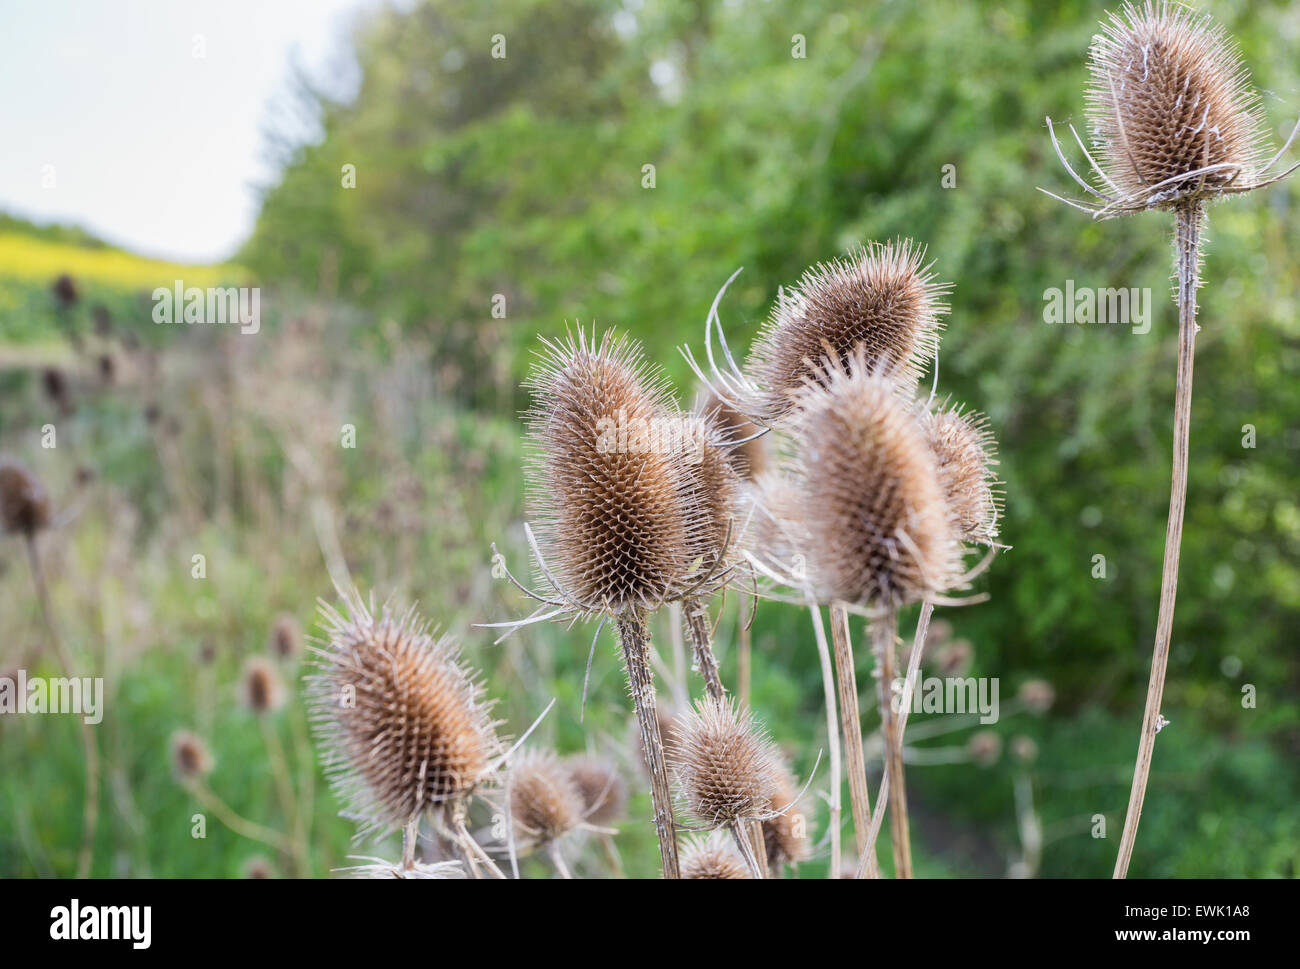 Spiky teasel heads (Dipsacus fullonum) growing in English countryside in the Cotswolds, UK in late spring/early summer Stock Photo